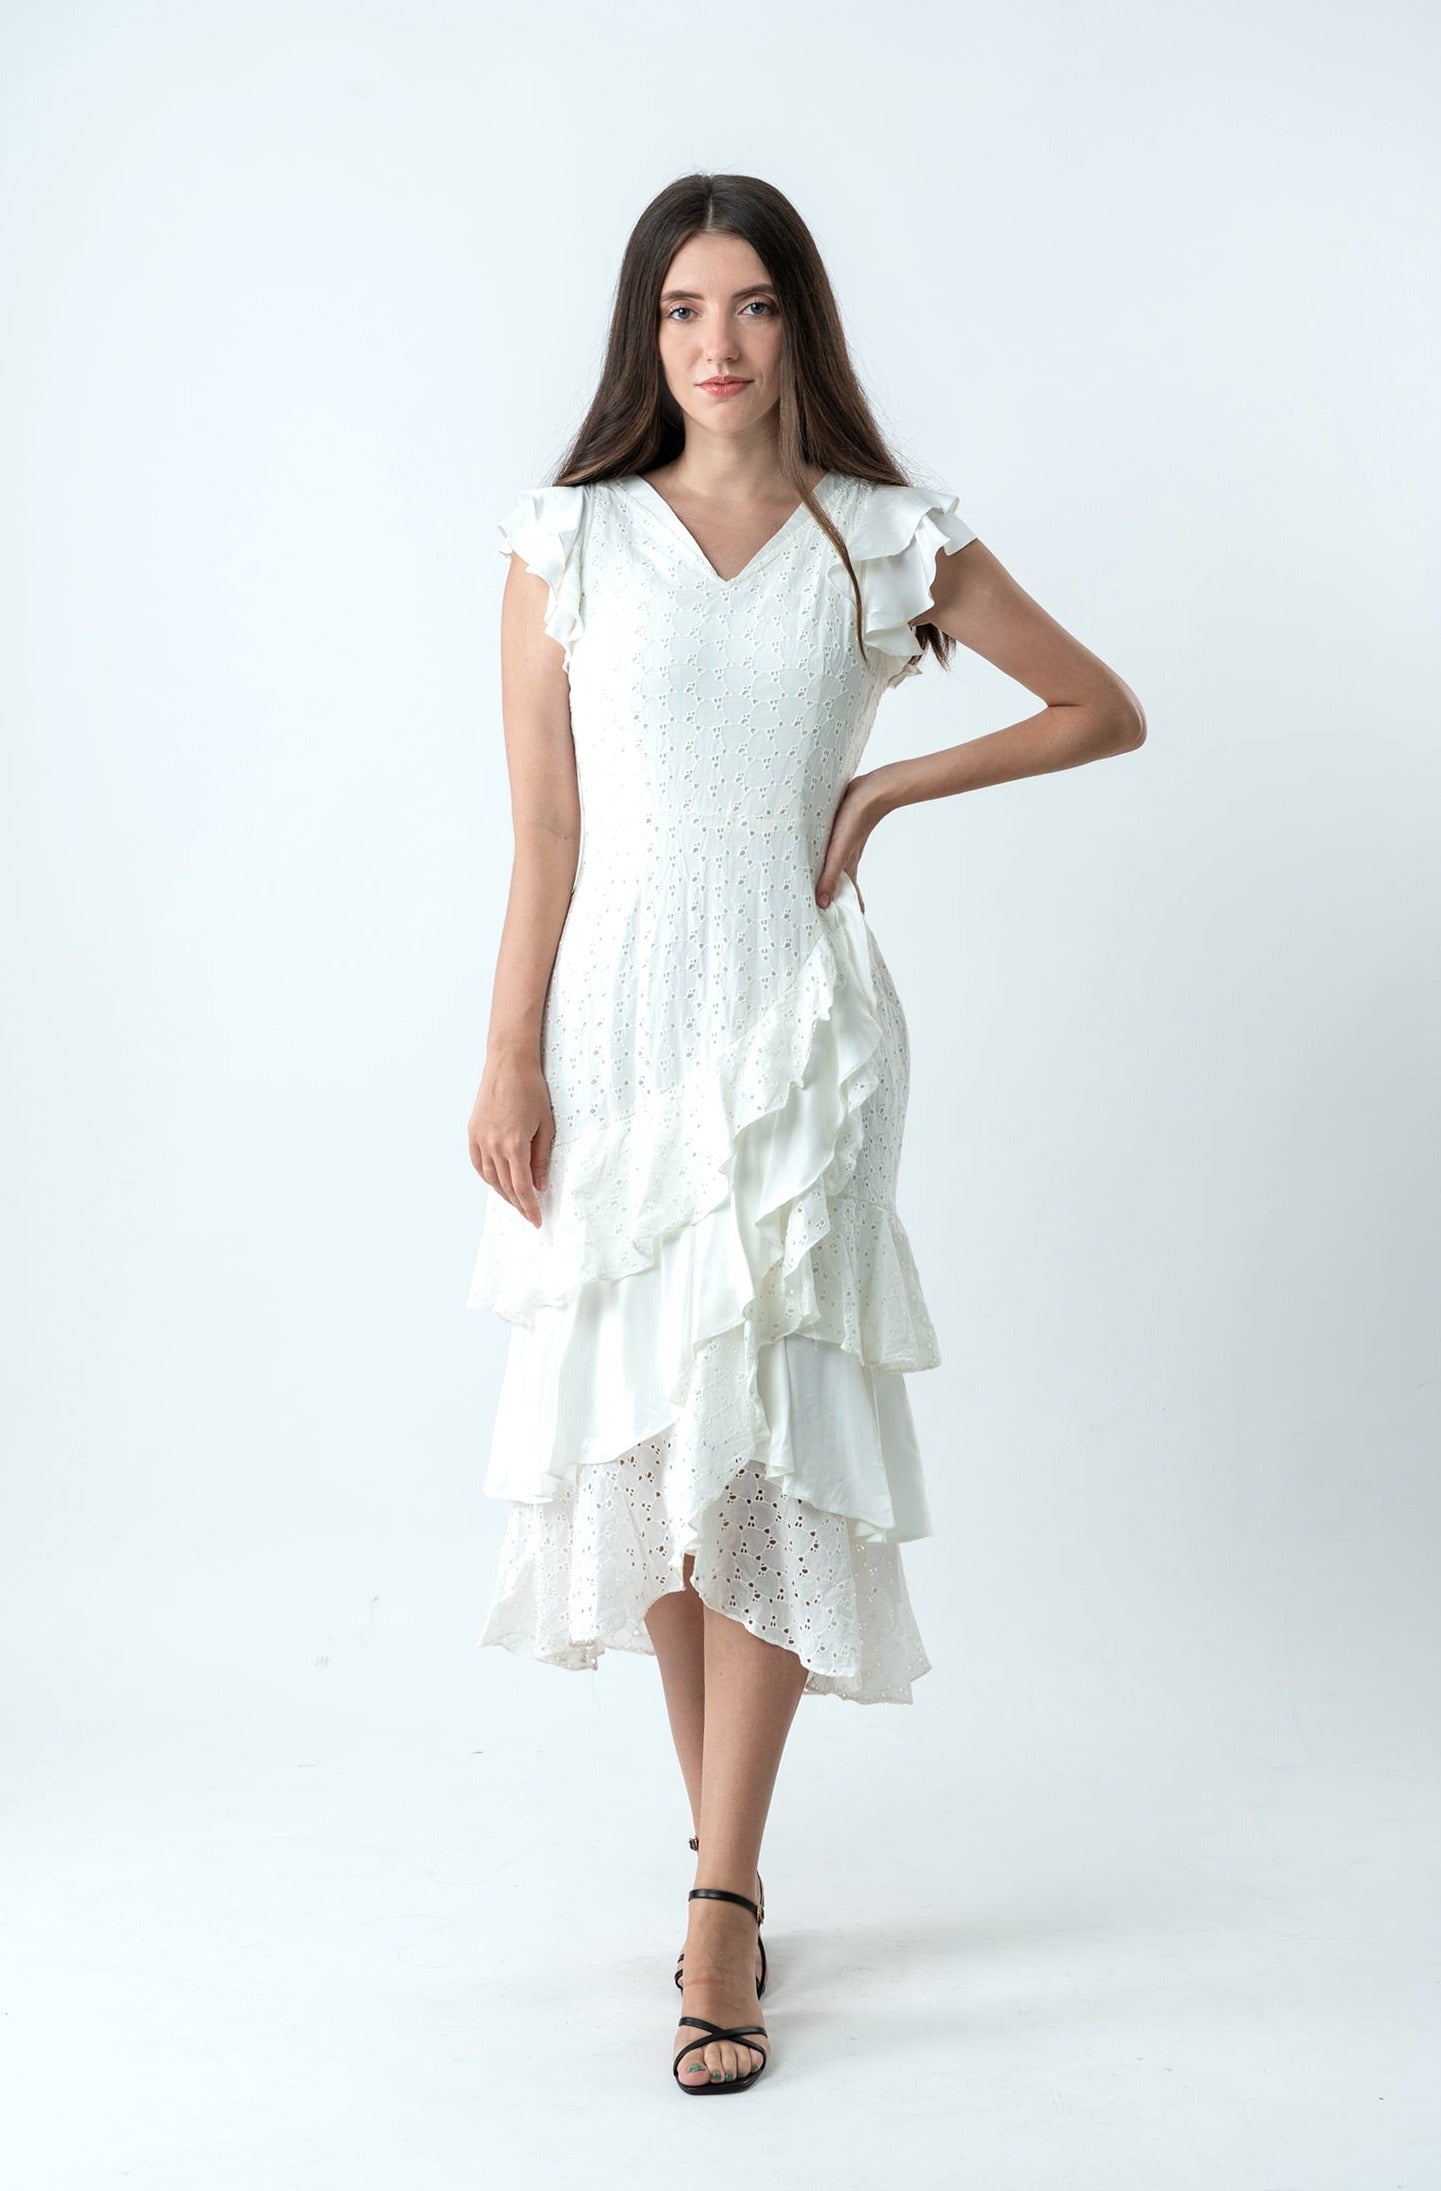 The cotton white dress has us dreaming of summer strolls through  the romance capitals of the world.